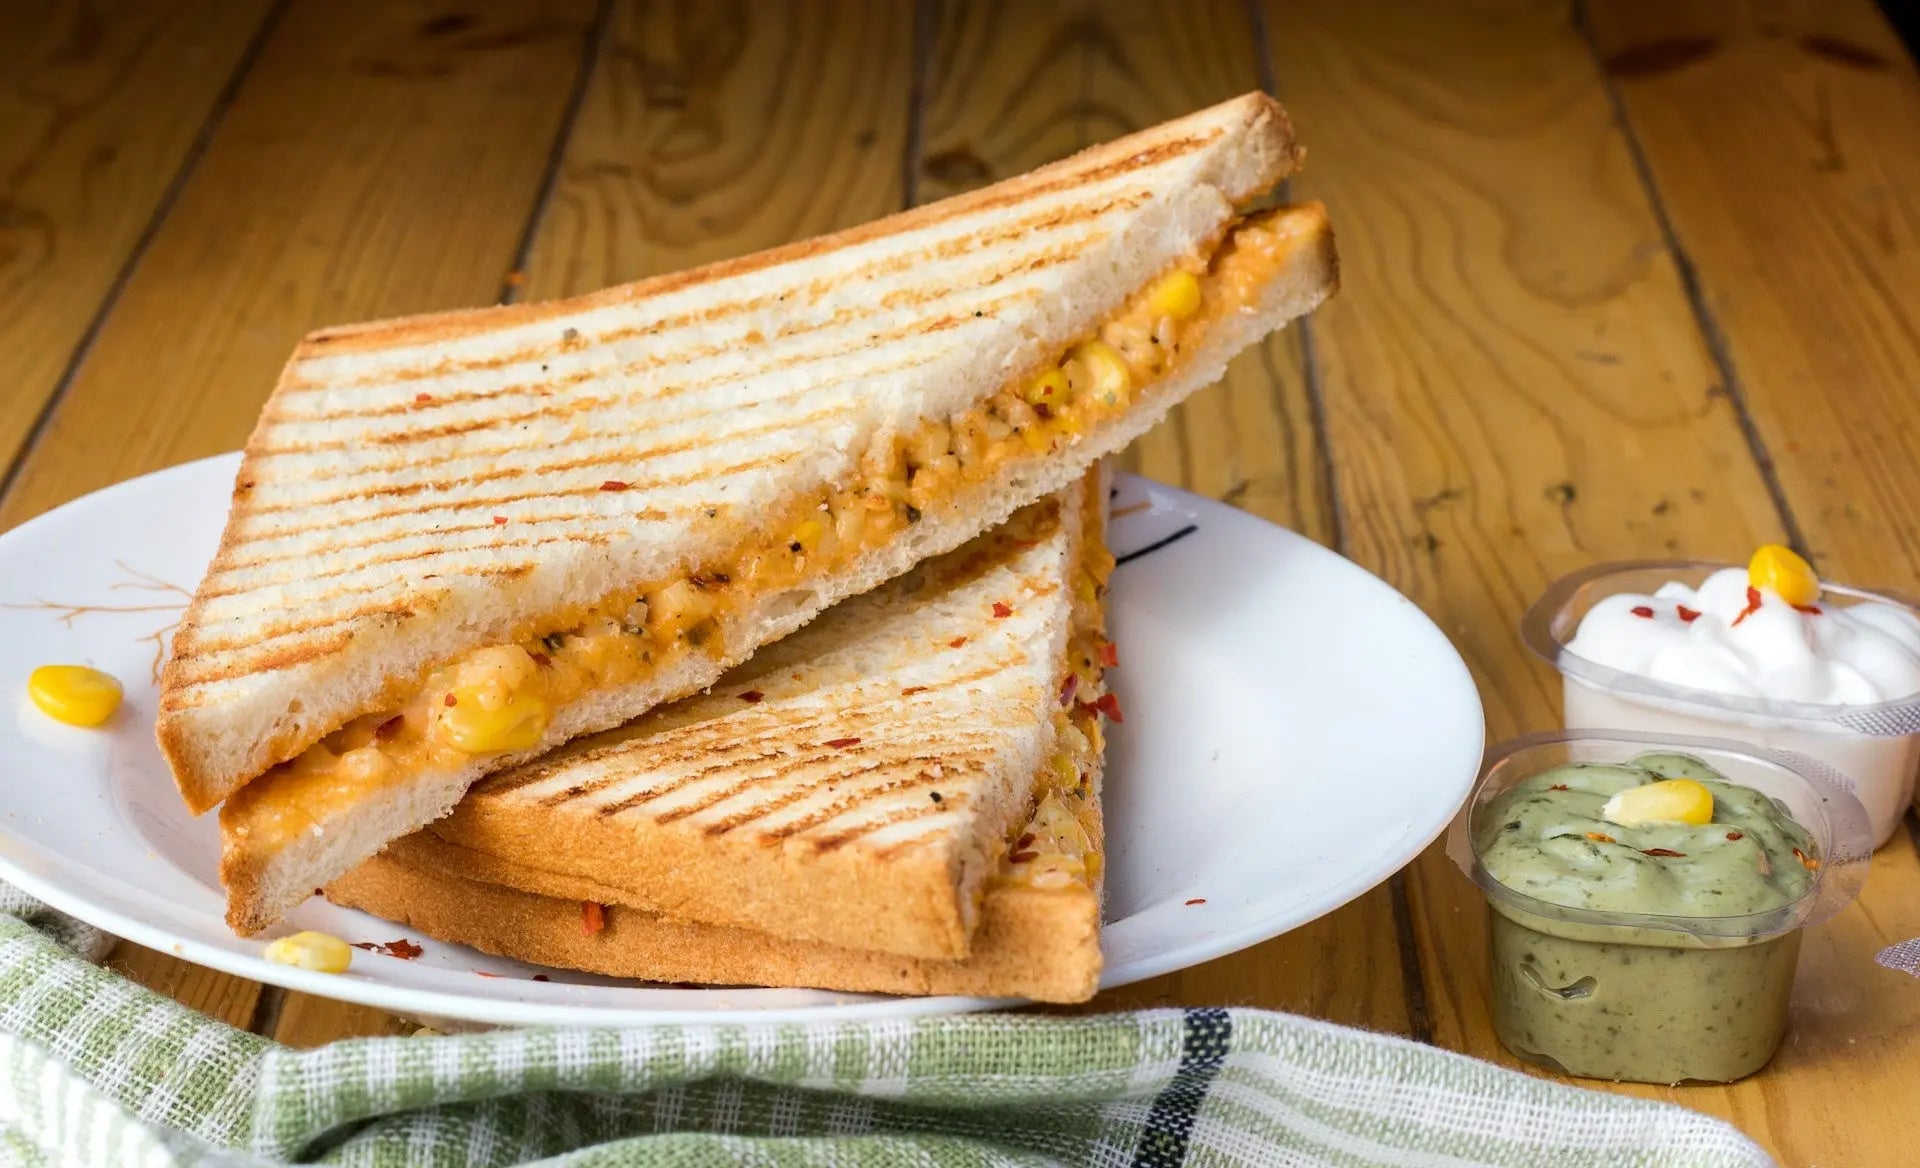 How-Long-Does-A-Grilled-Cheese-Sandwich-Last-In-The-Fridge | Fridge.com